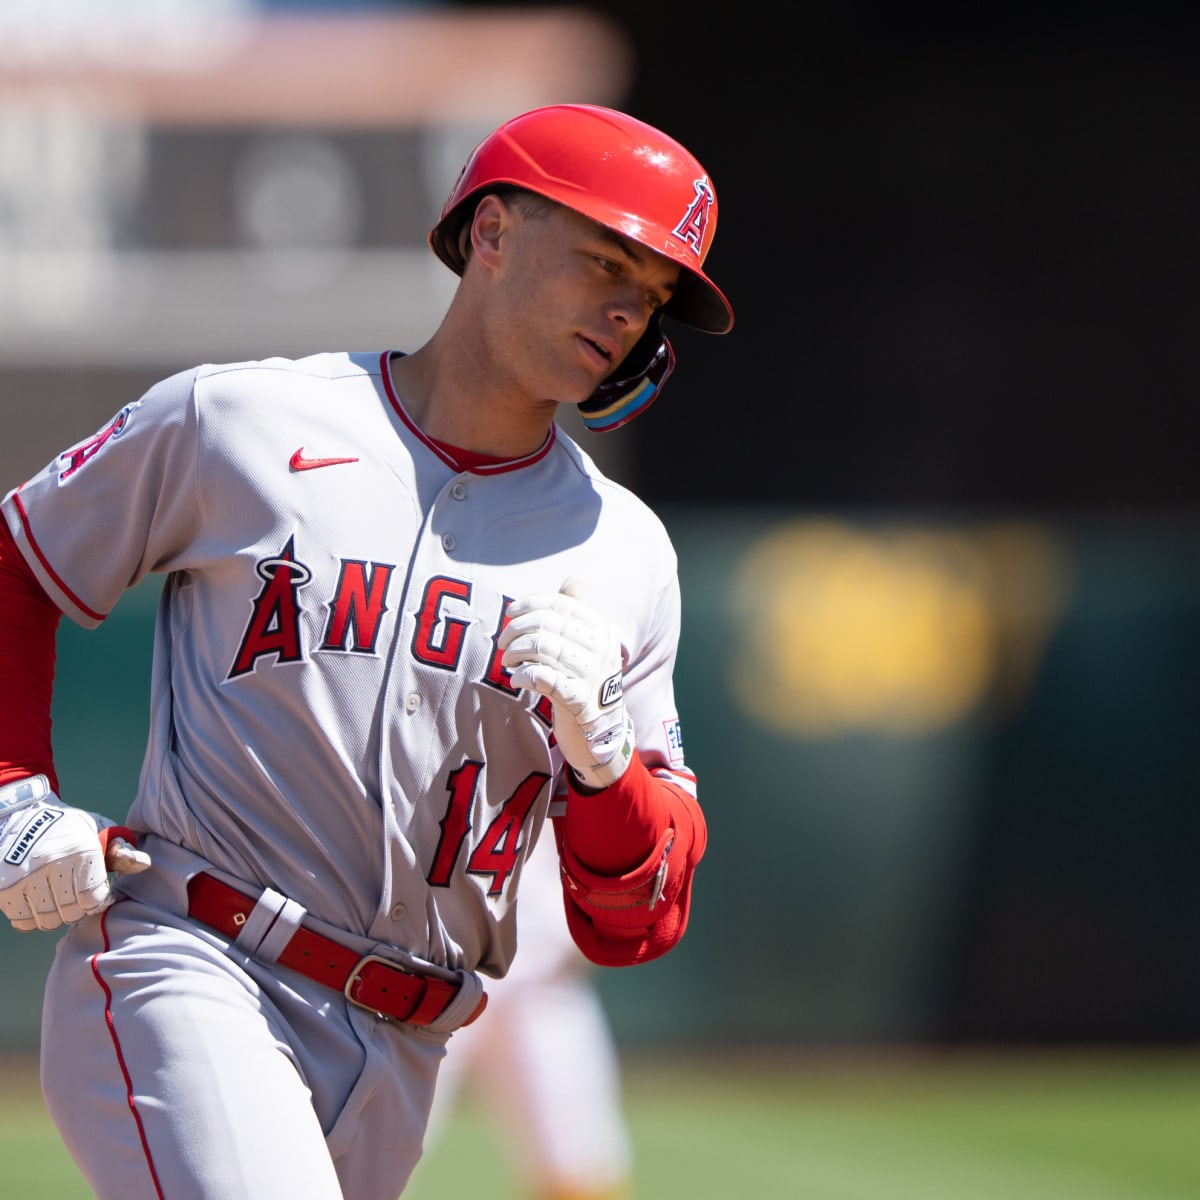 Logan O'Hoppe's ascent to pros and catching Shohei Ohtani is no surprise to  Angels manager - Newsday